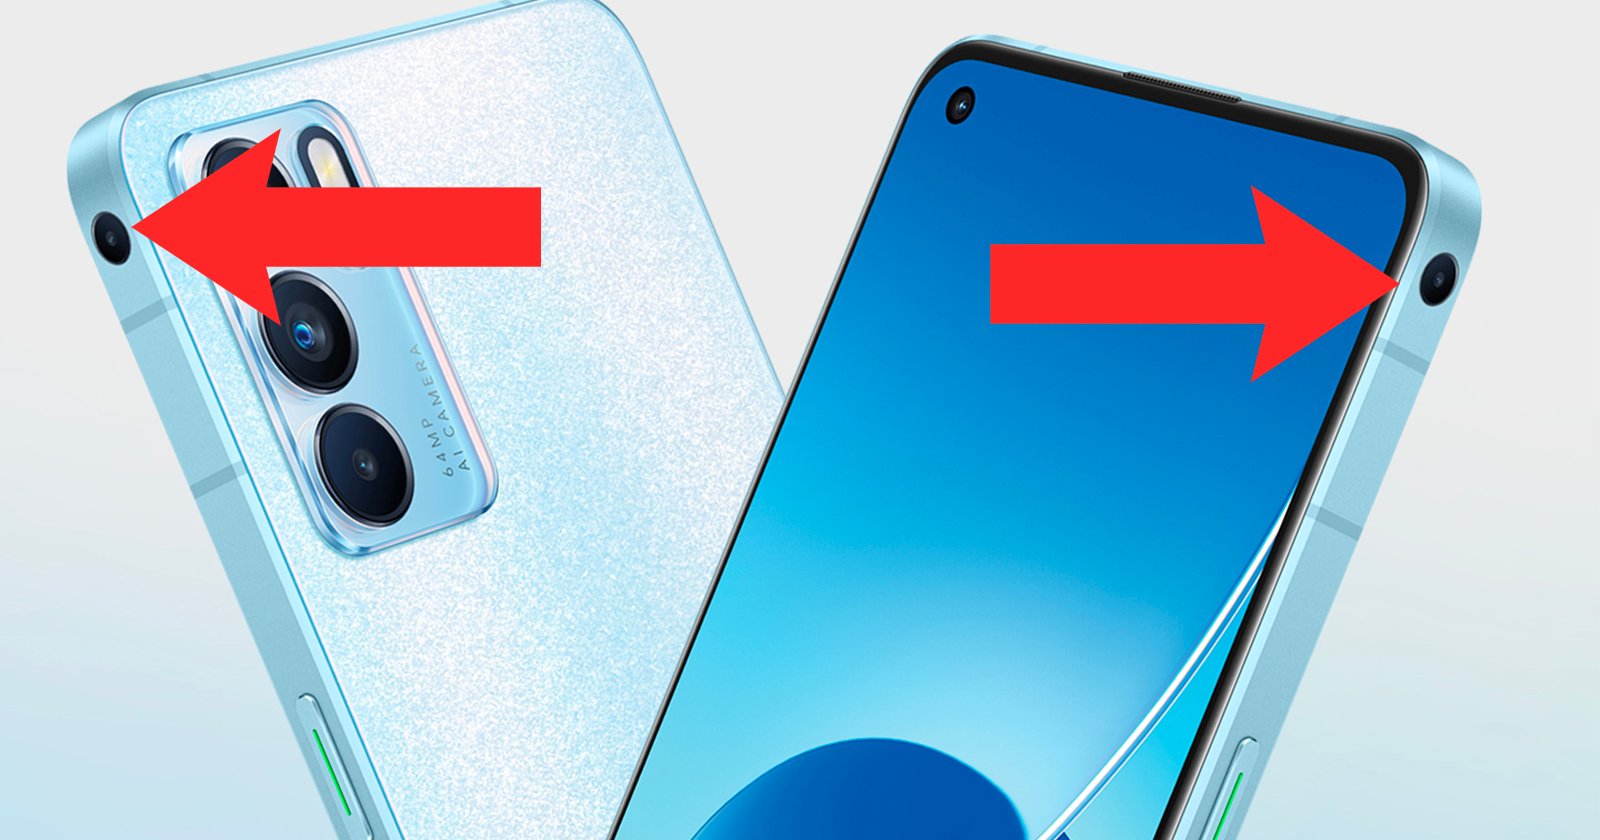 Oppo Double-sided Pop-up Camera Parent Reveal Unique Functionality